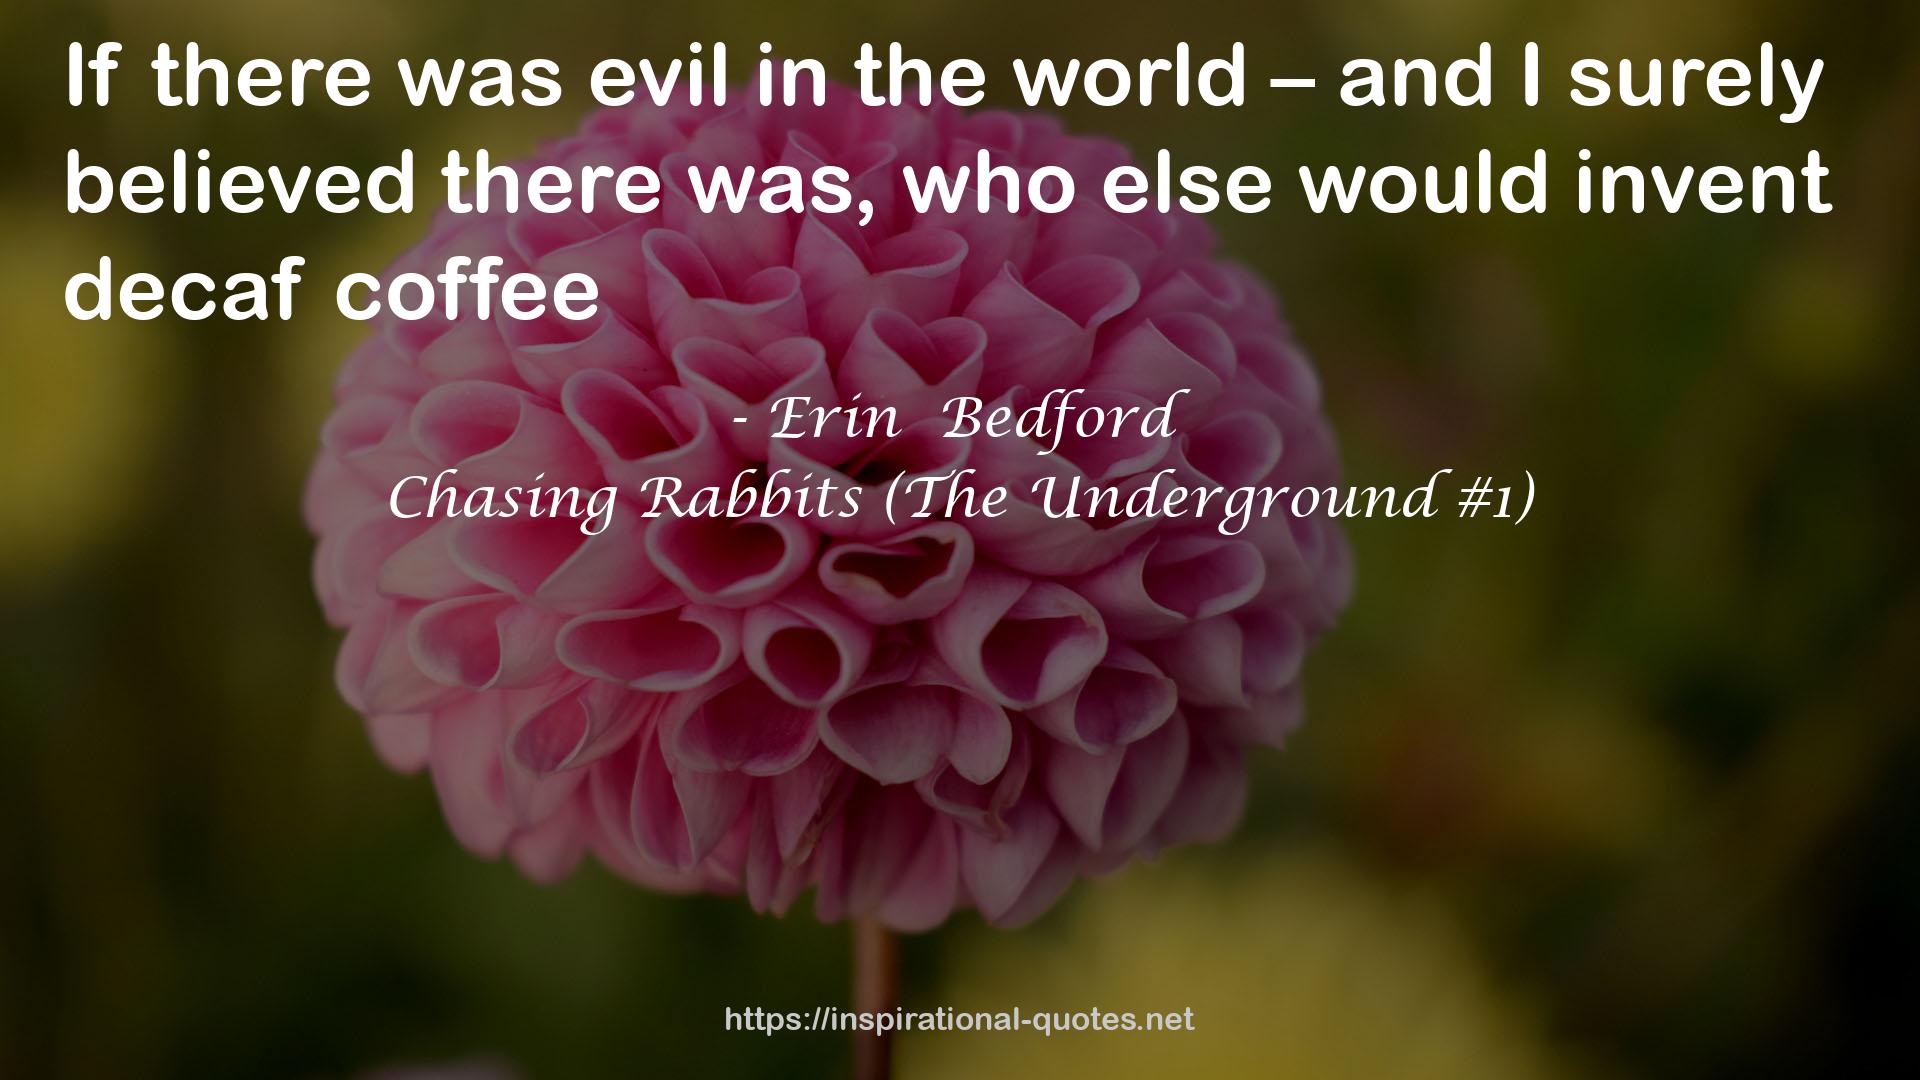 Chasing Rabbits (The Underground #1) QUOTES